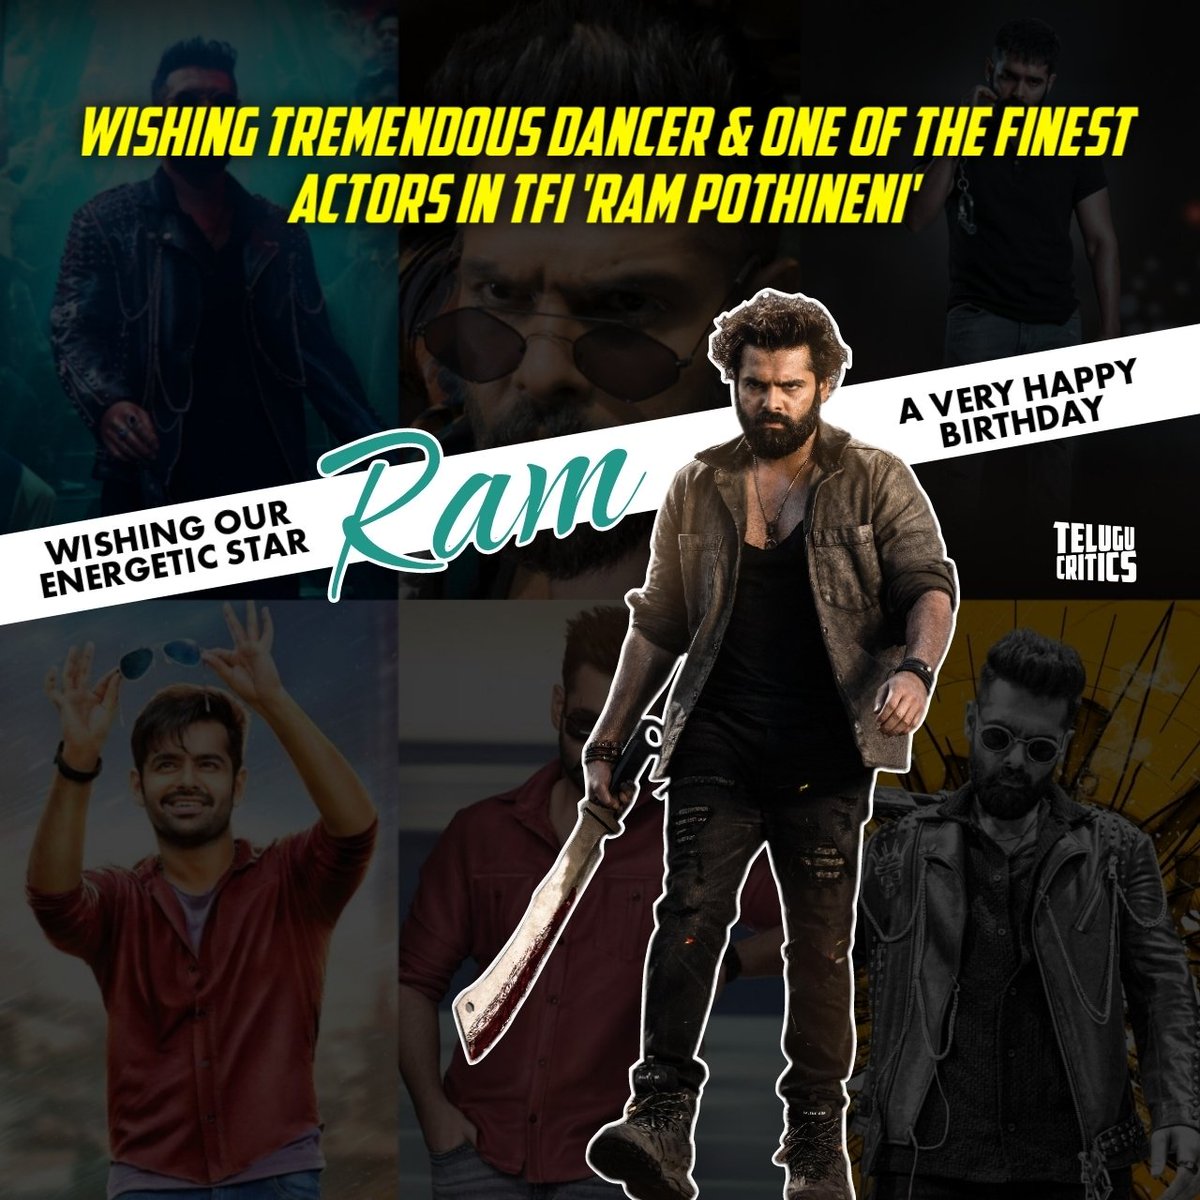 One of the most stylish and energetic actors in the industry, won the hearts with his graceful dancing skills and impeccable acting! 
ㅤ
#HappyBirthdayRamPothineni
#HappyBirthdayRam
#HappyBirthdayRapo
#HBDRamPothineni
#HBDRam
#HBDRapo